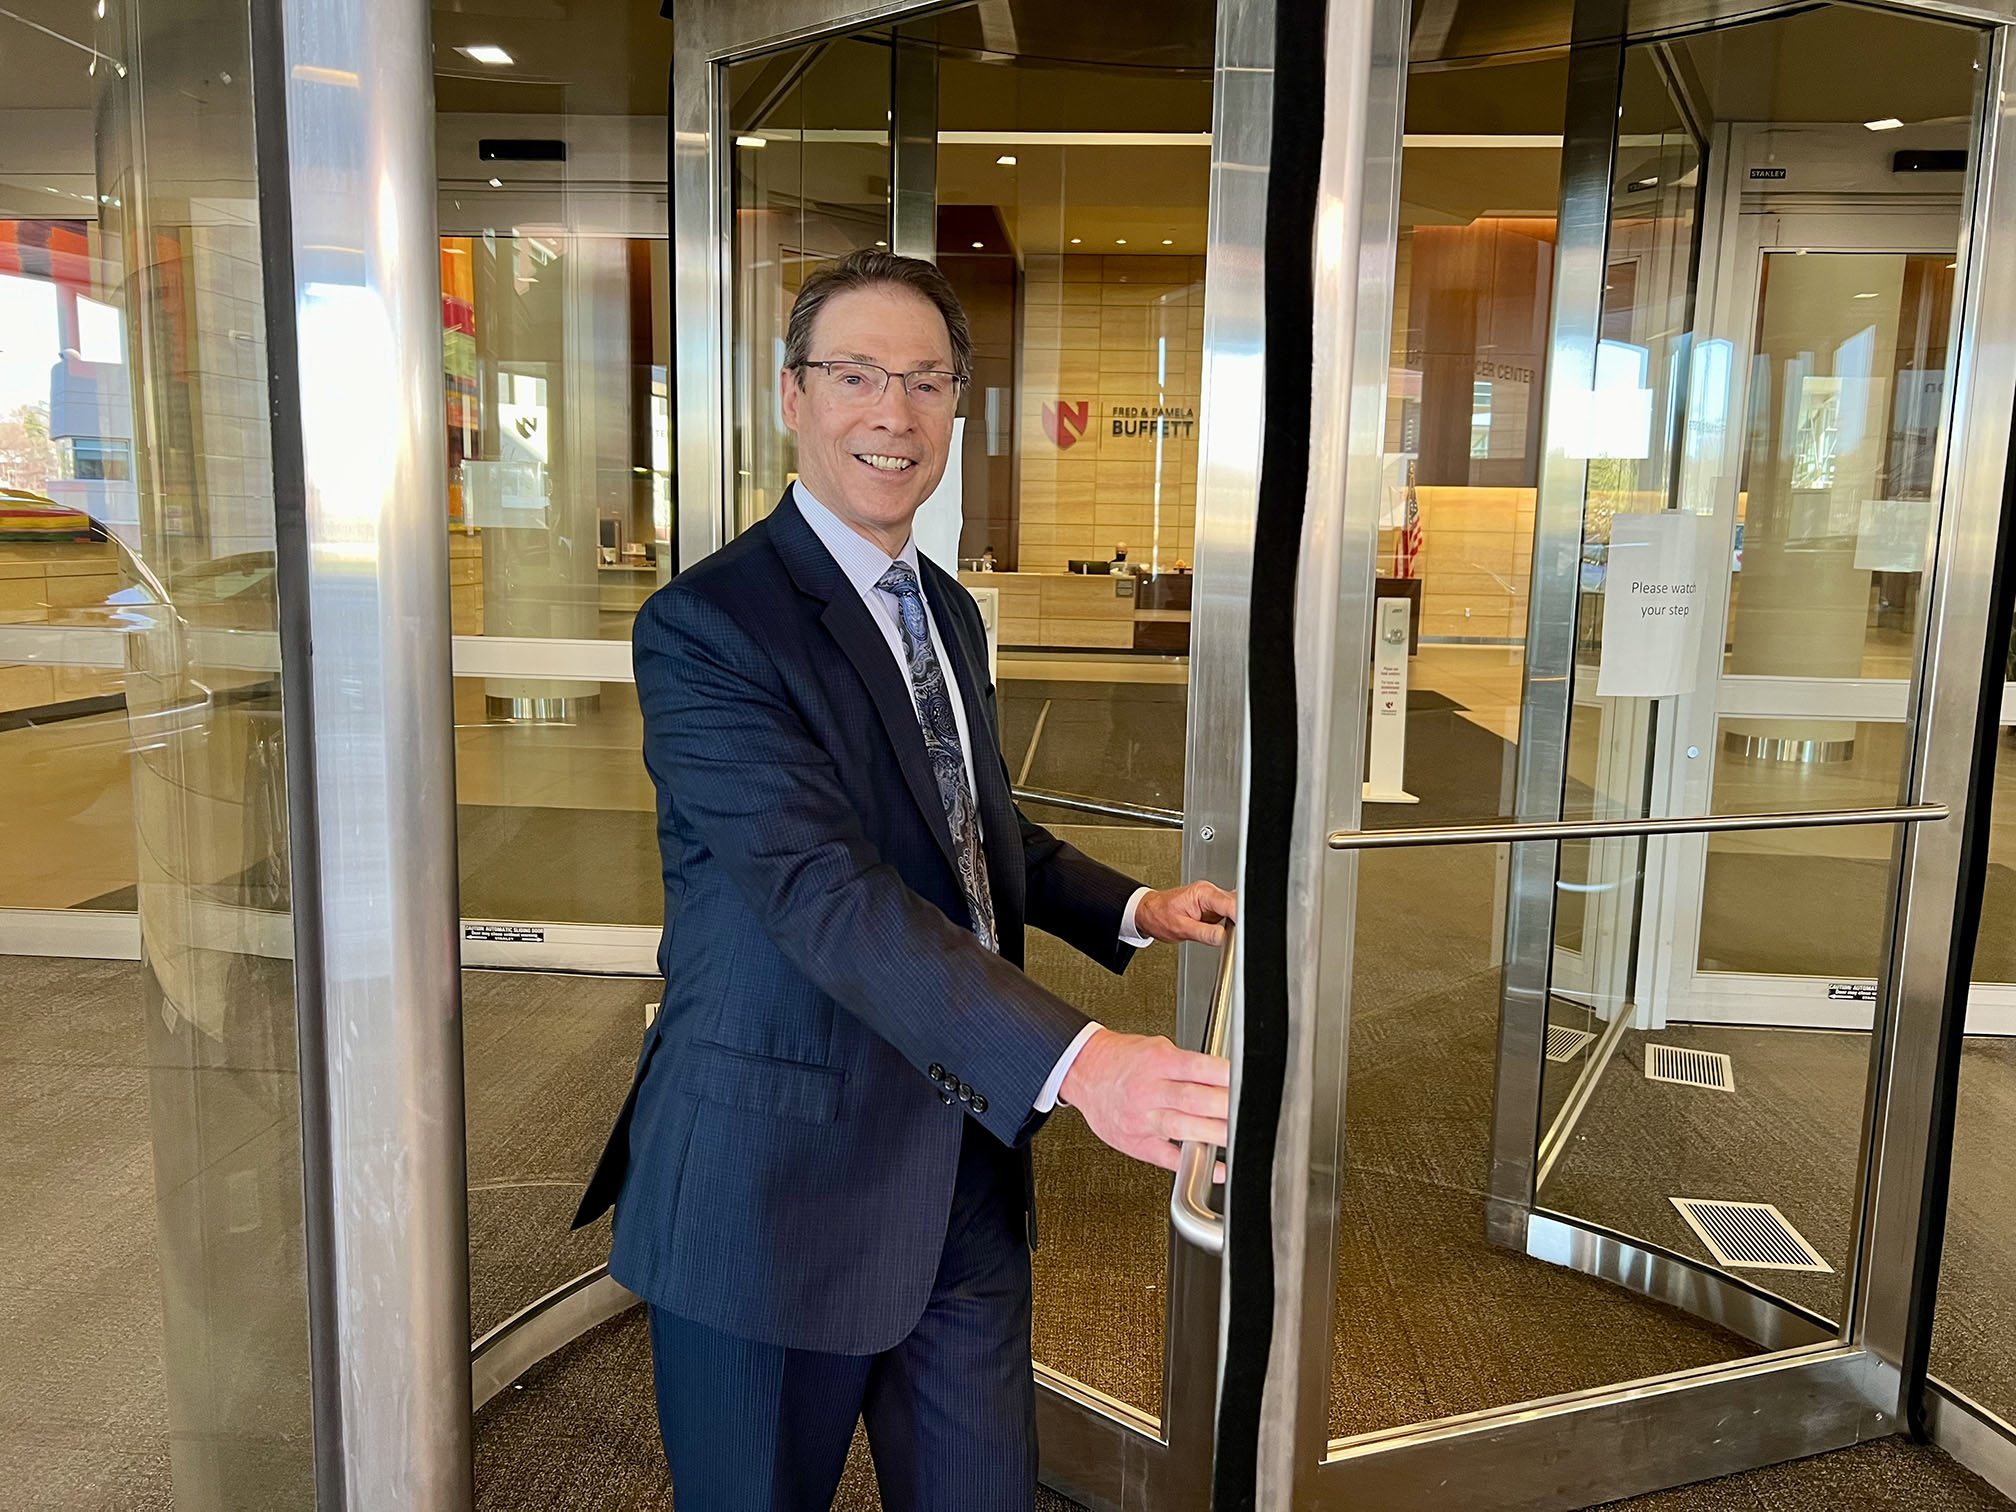 Kyle Meyer&comma; PhD&comma; dean of the UNMC College of Allied Health Professions&comma; likens accreditation throughout the college as a perpetual revolving door&period;